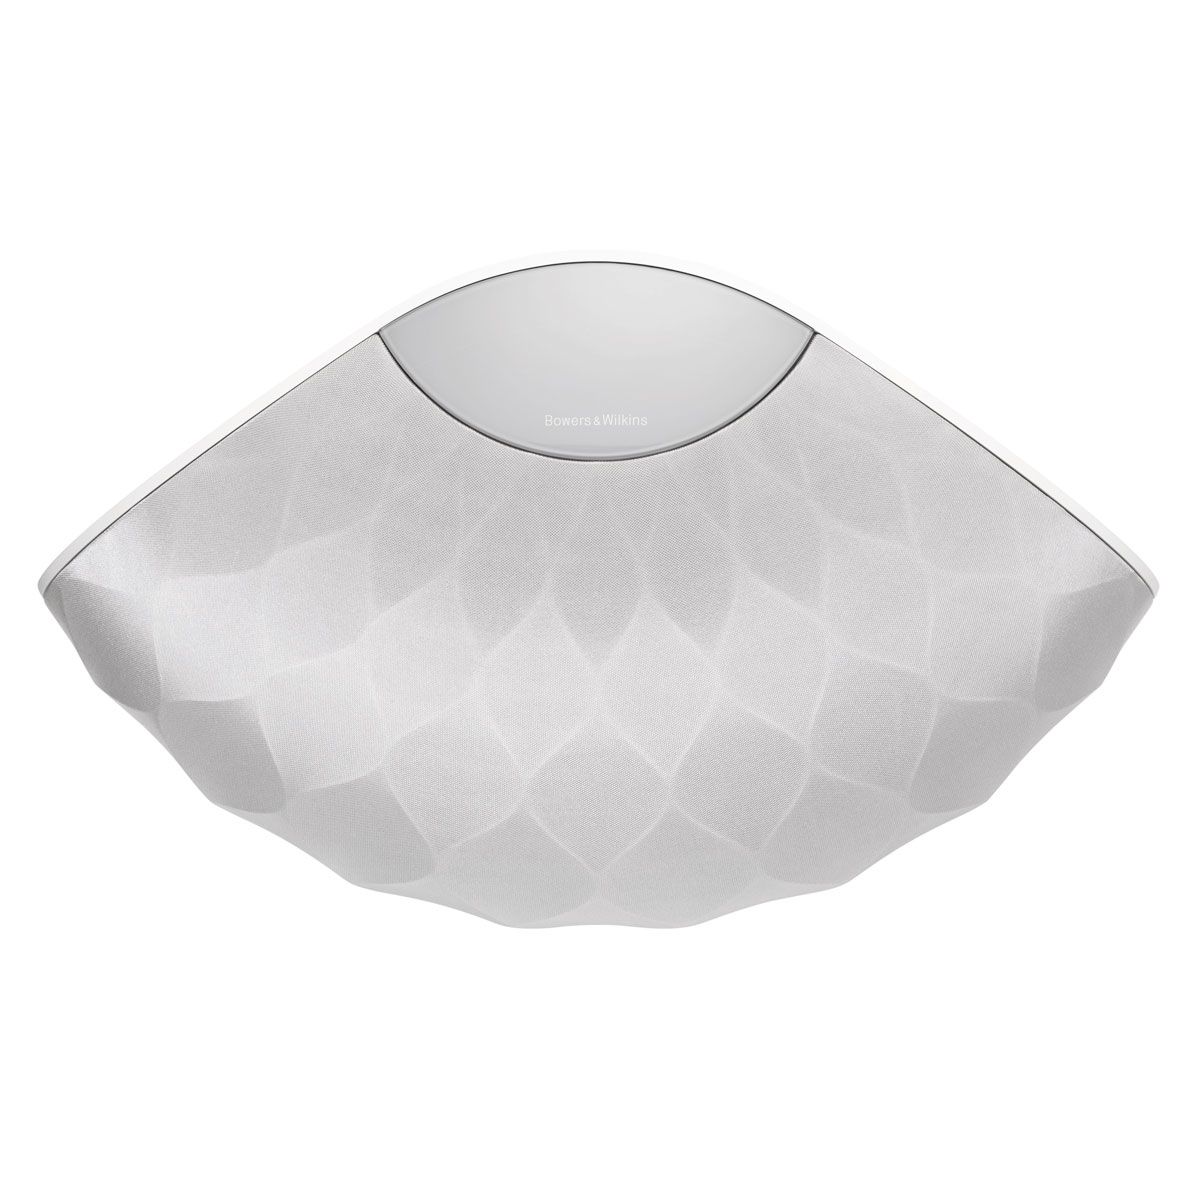 Bowers & Wilkins Wedge - Top View - White